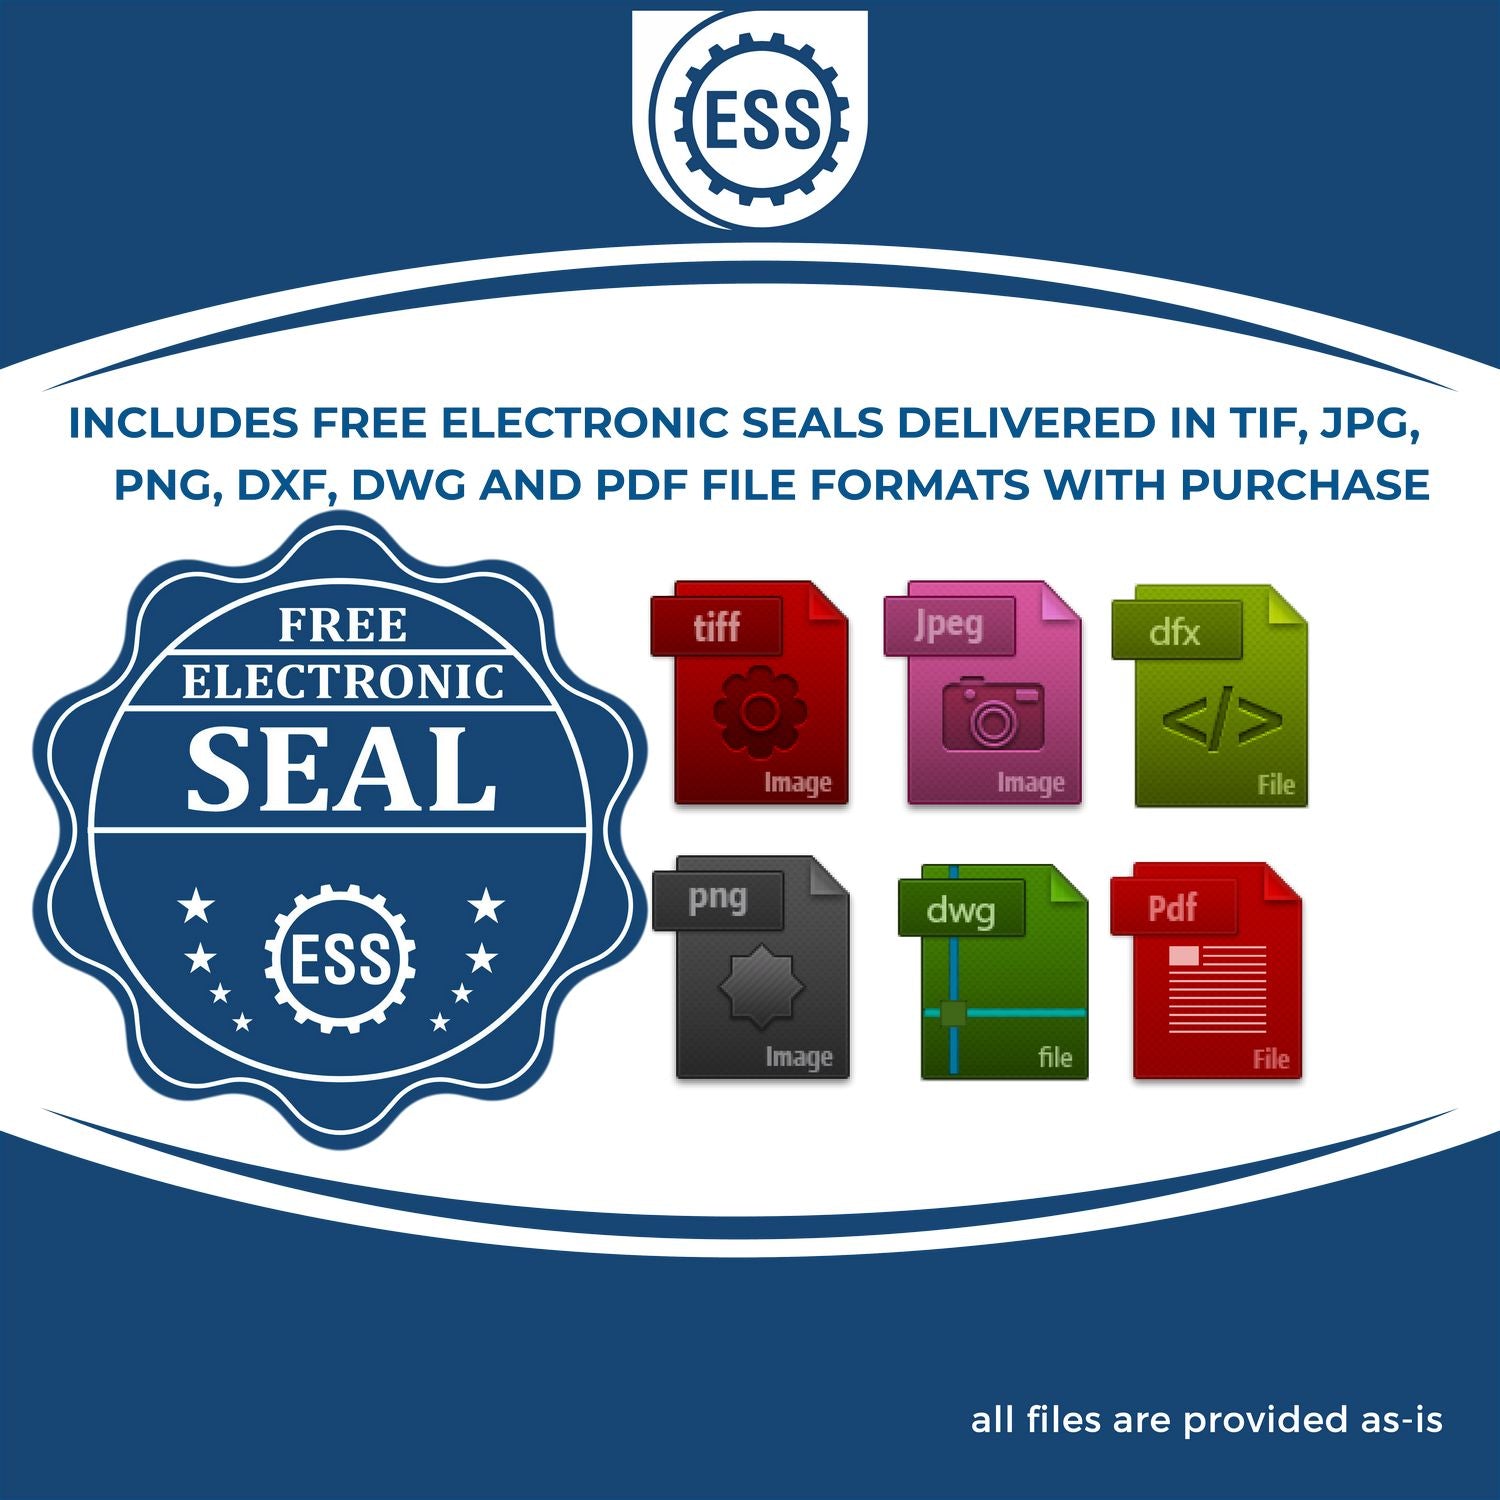 An infographic for the free electronic seal for the State of Oregon Extended Long Reach Engineer Seal illustrating the different file type icons such as DXF, DWG, TIF, JPG and PNG.